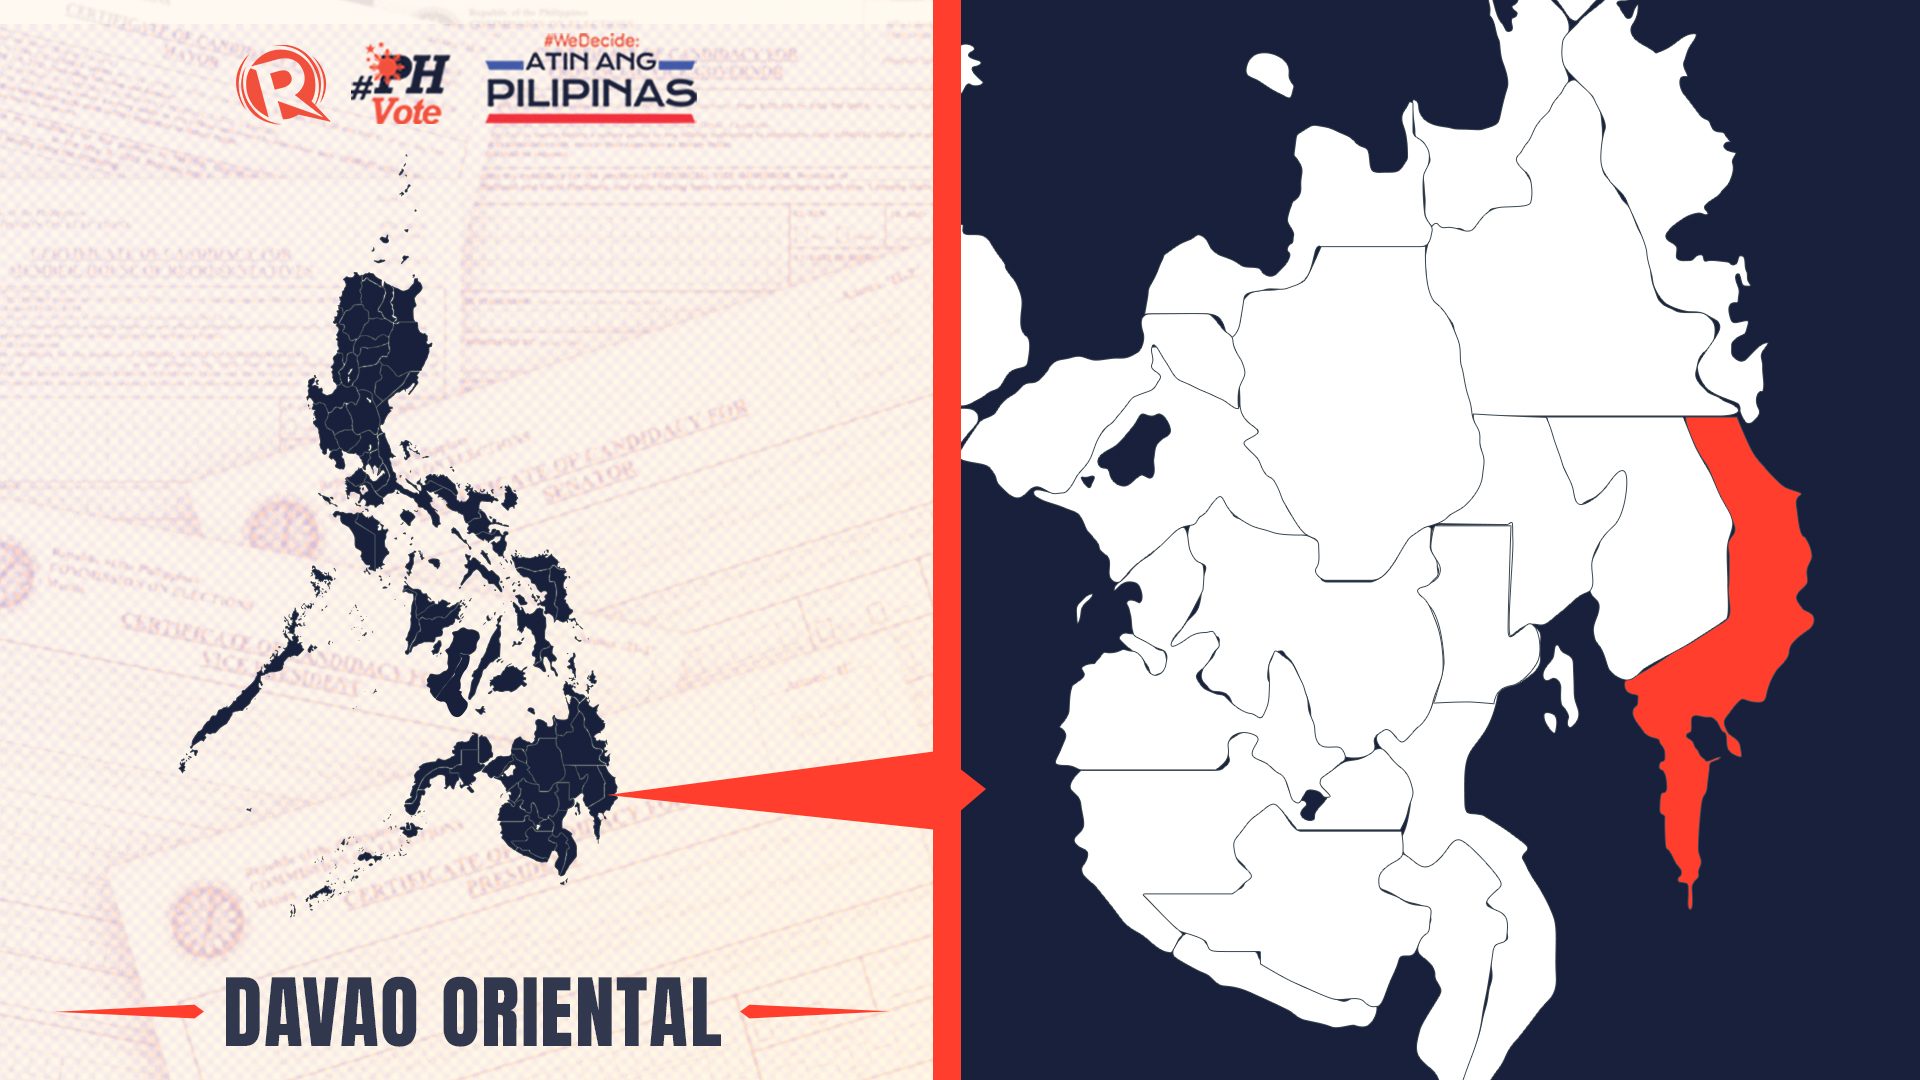 LIST: Who is running in Davao Oriental in the 2022 Philippine elections?